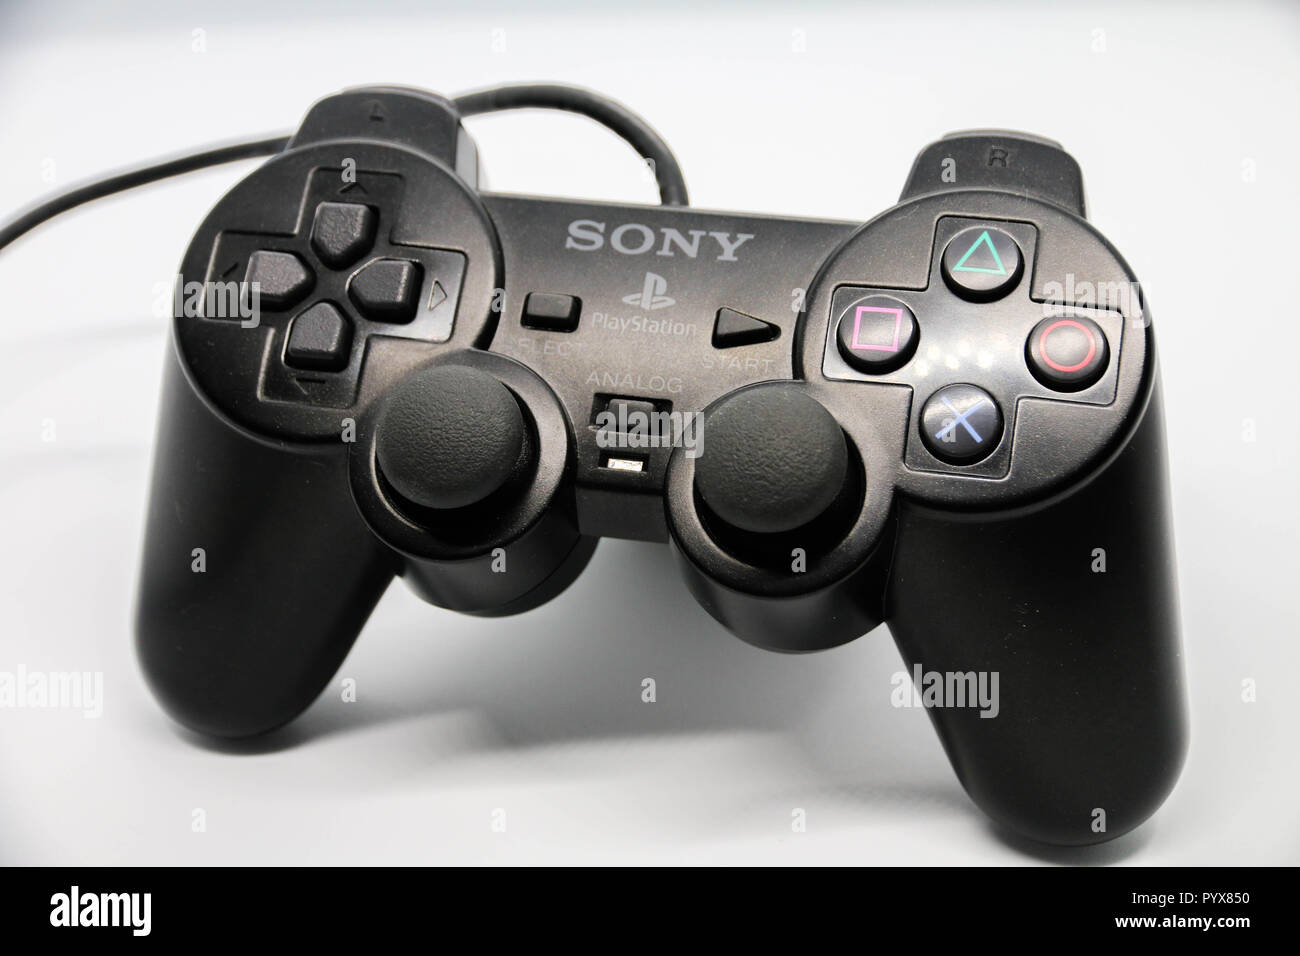 Playstation 2 High Resolution Stock Photography and Images - Alamy